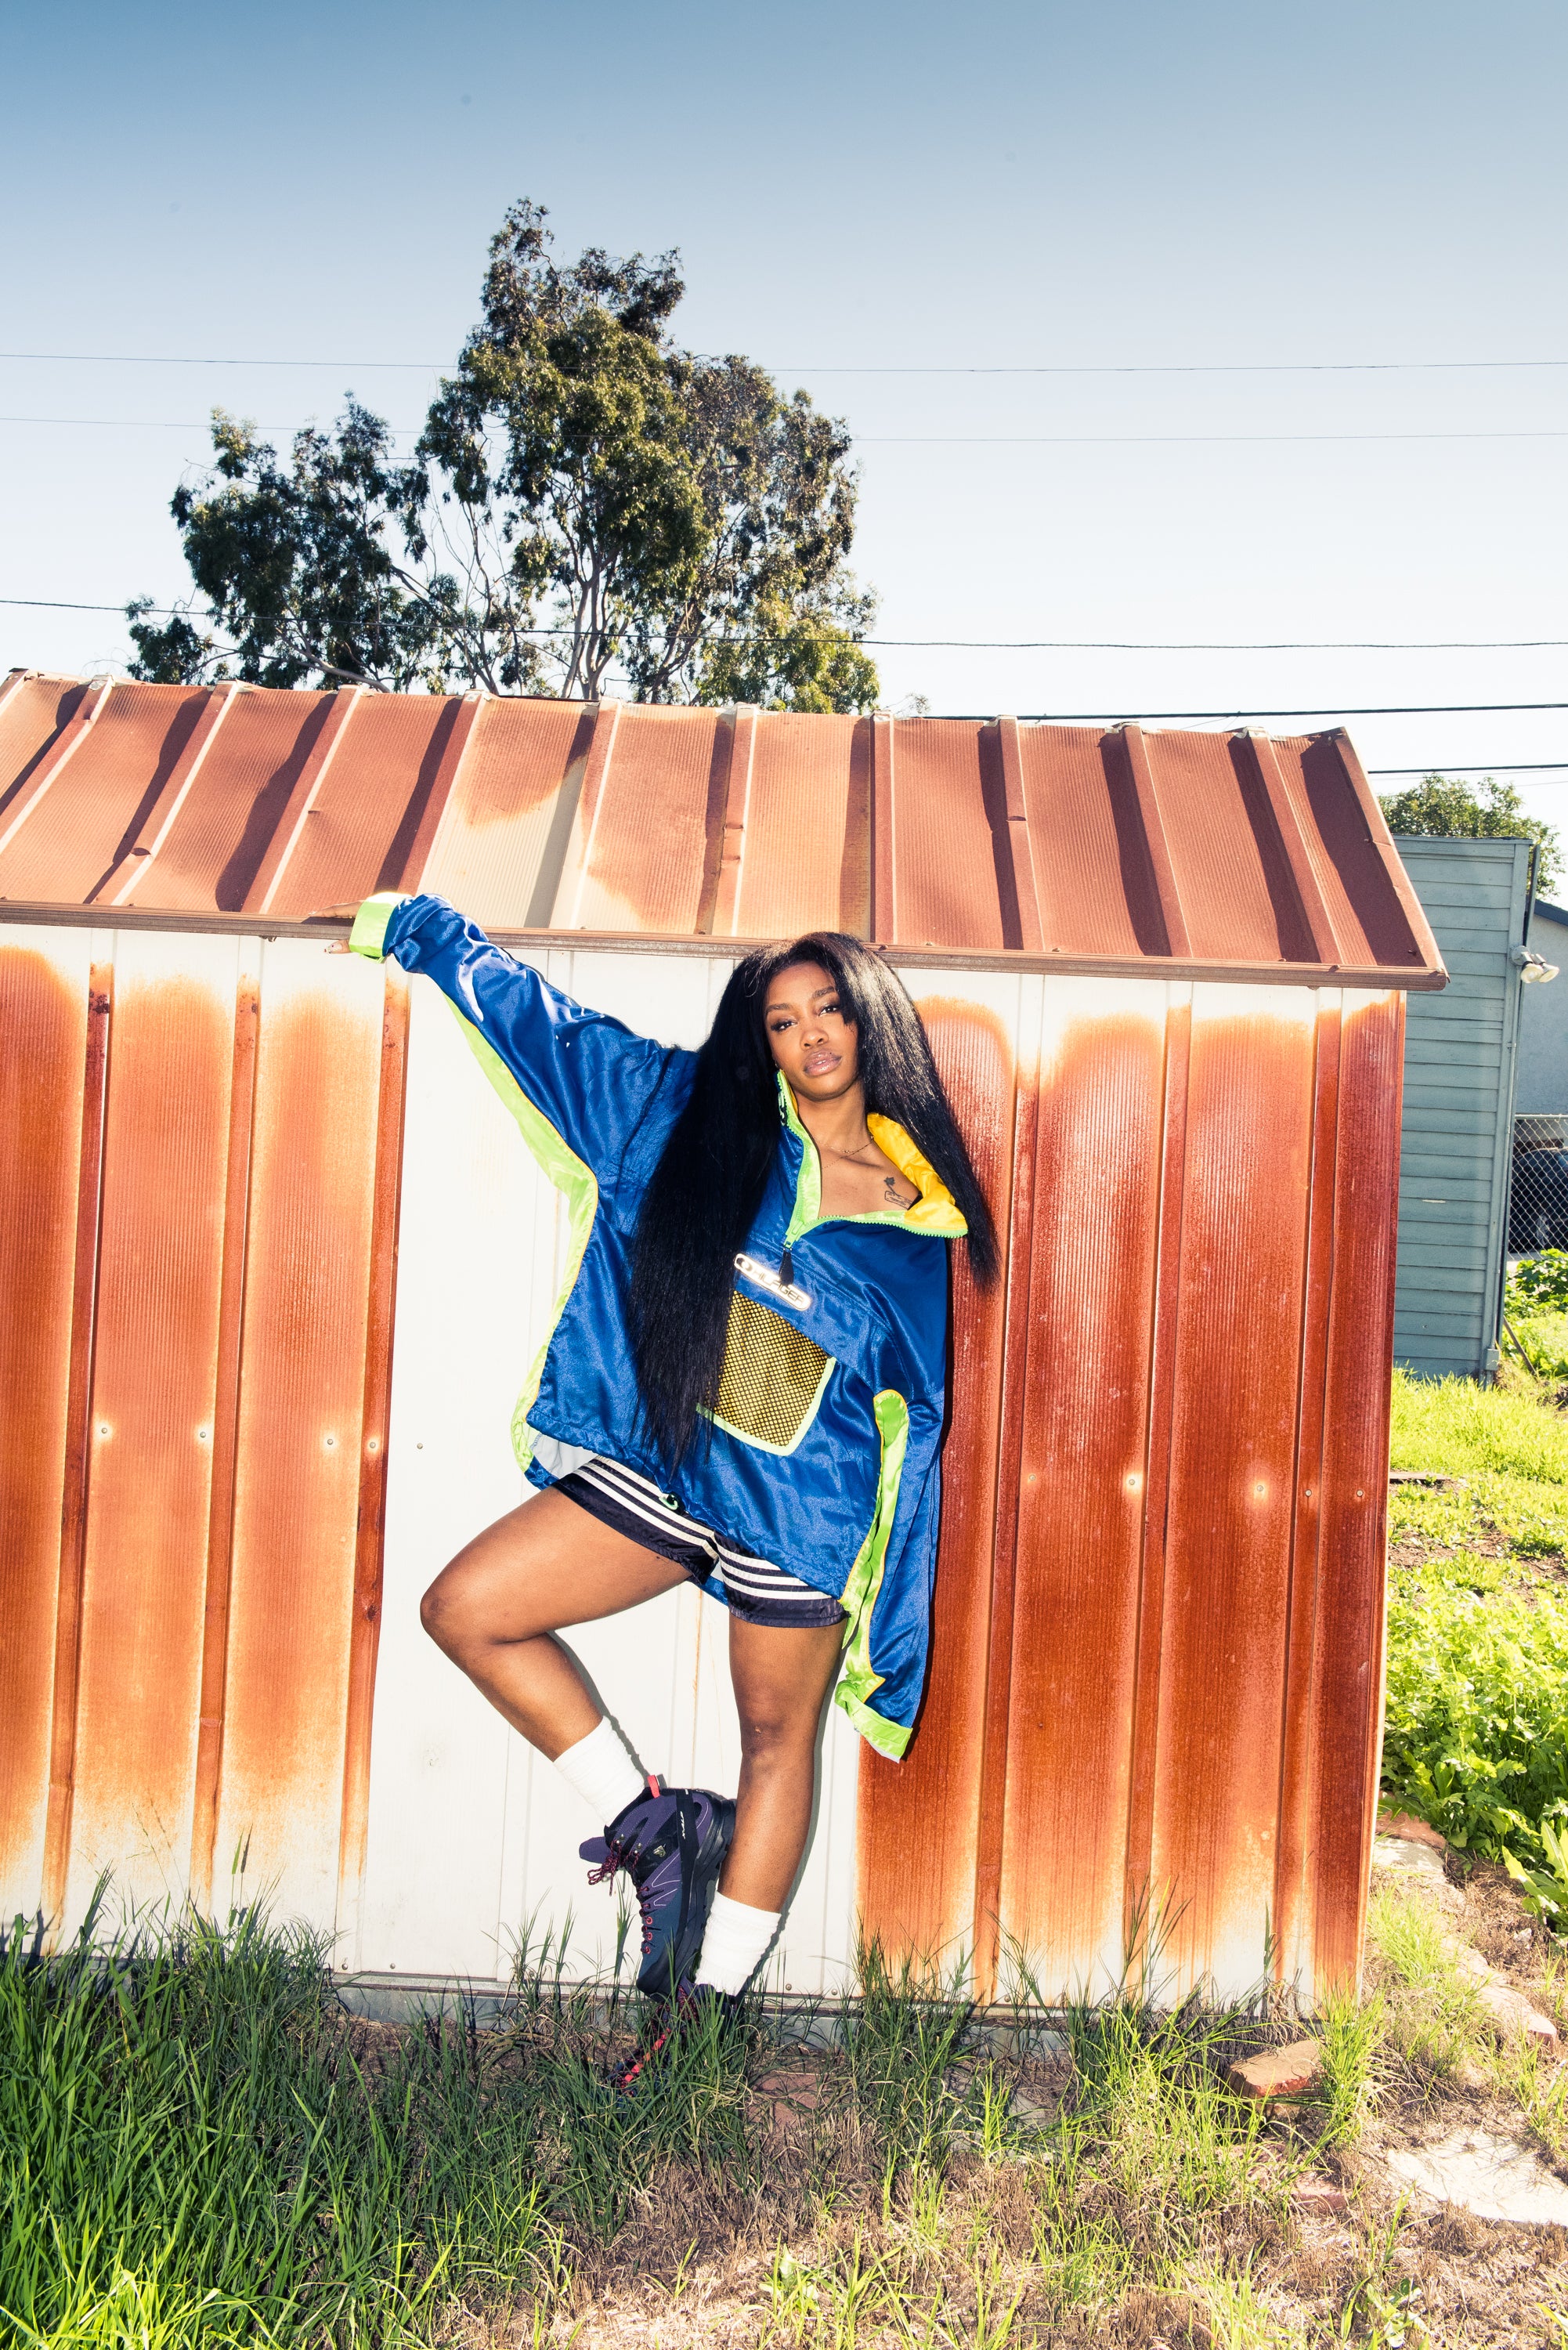 SZA Gives a Peek Into Her Funky Closet, Talks Major Weight Loss and New Album 'CTRL'
